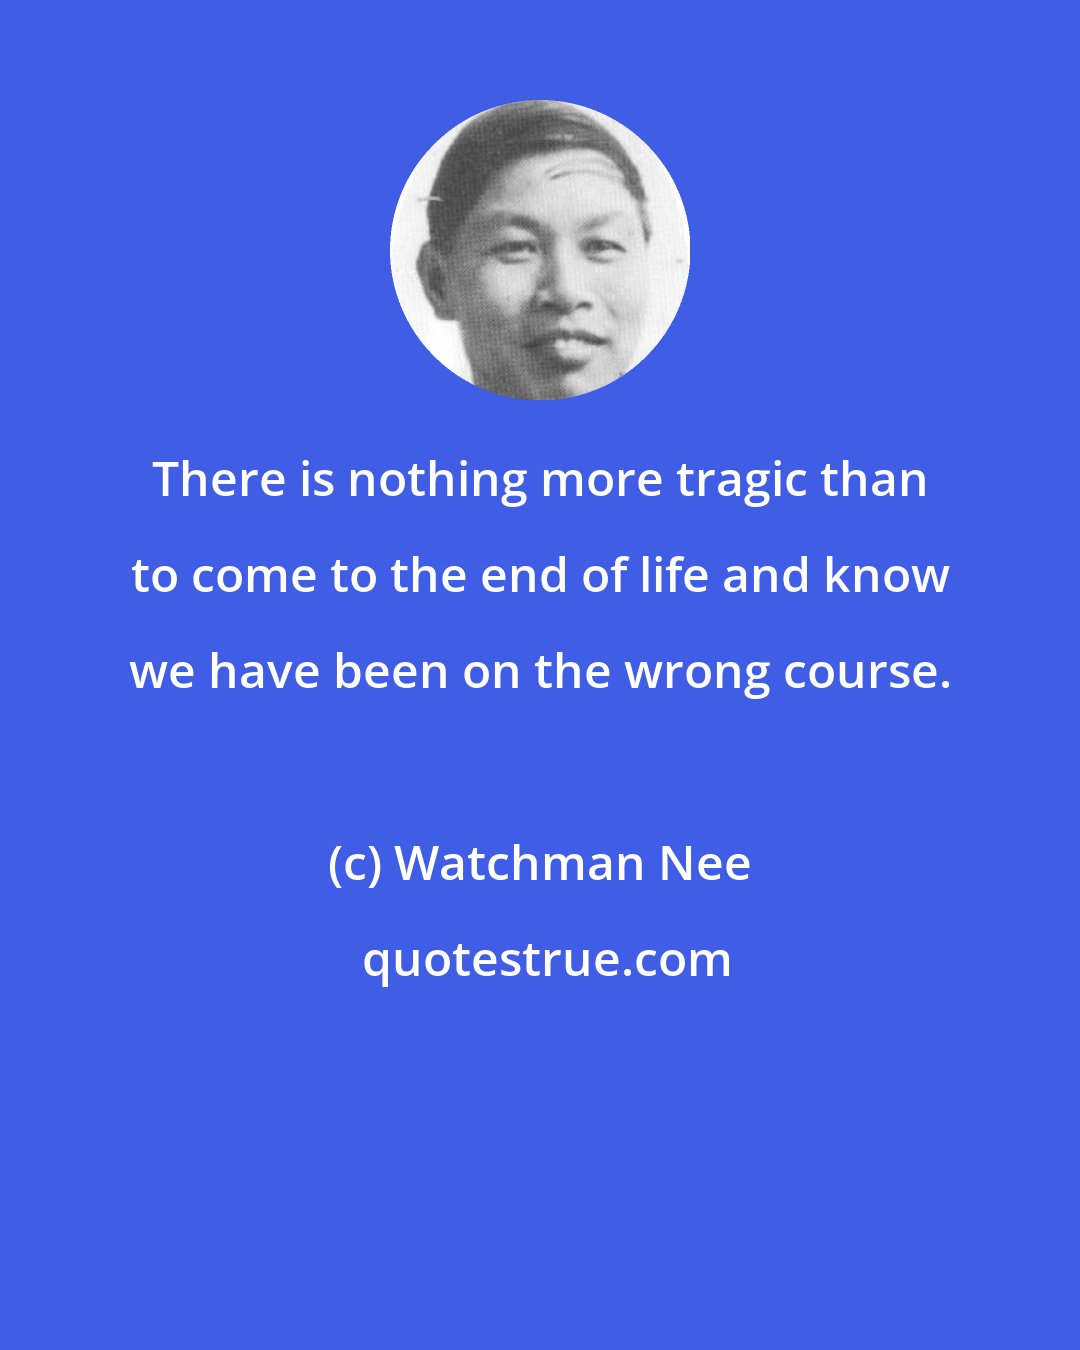 Watchman Nee: There is nothing more tragic than to come to the end of life and know we have been on the wrong course.